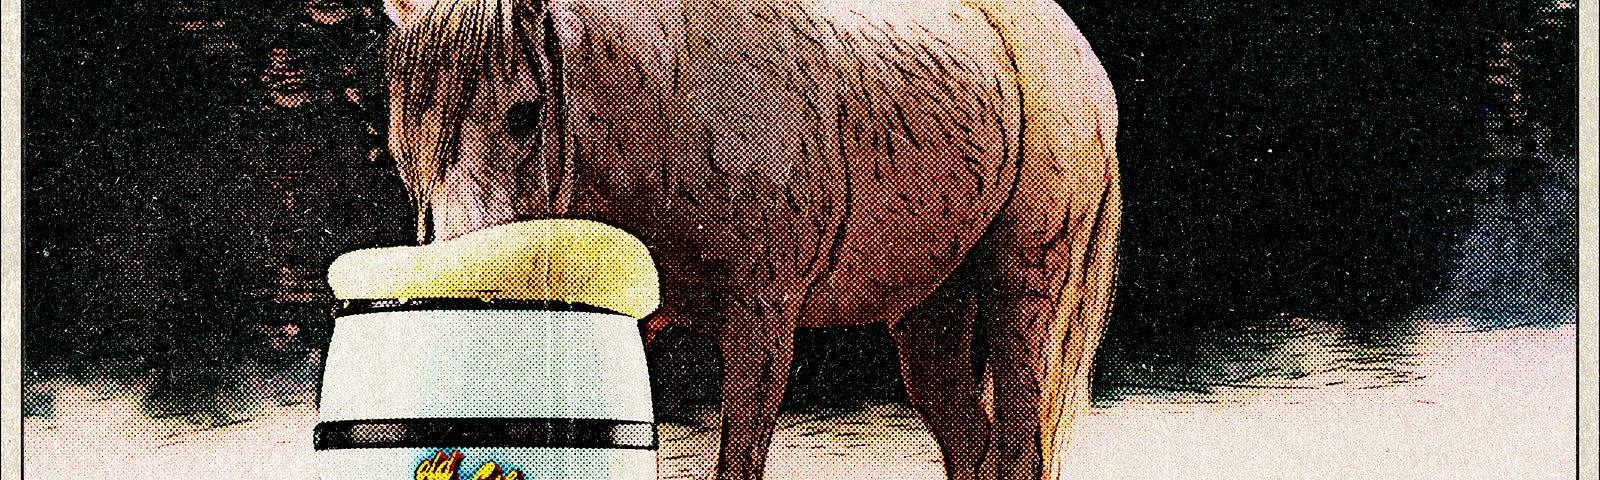 Horse drinking from beer keg